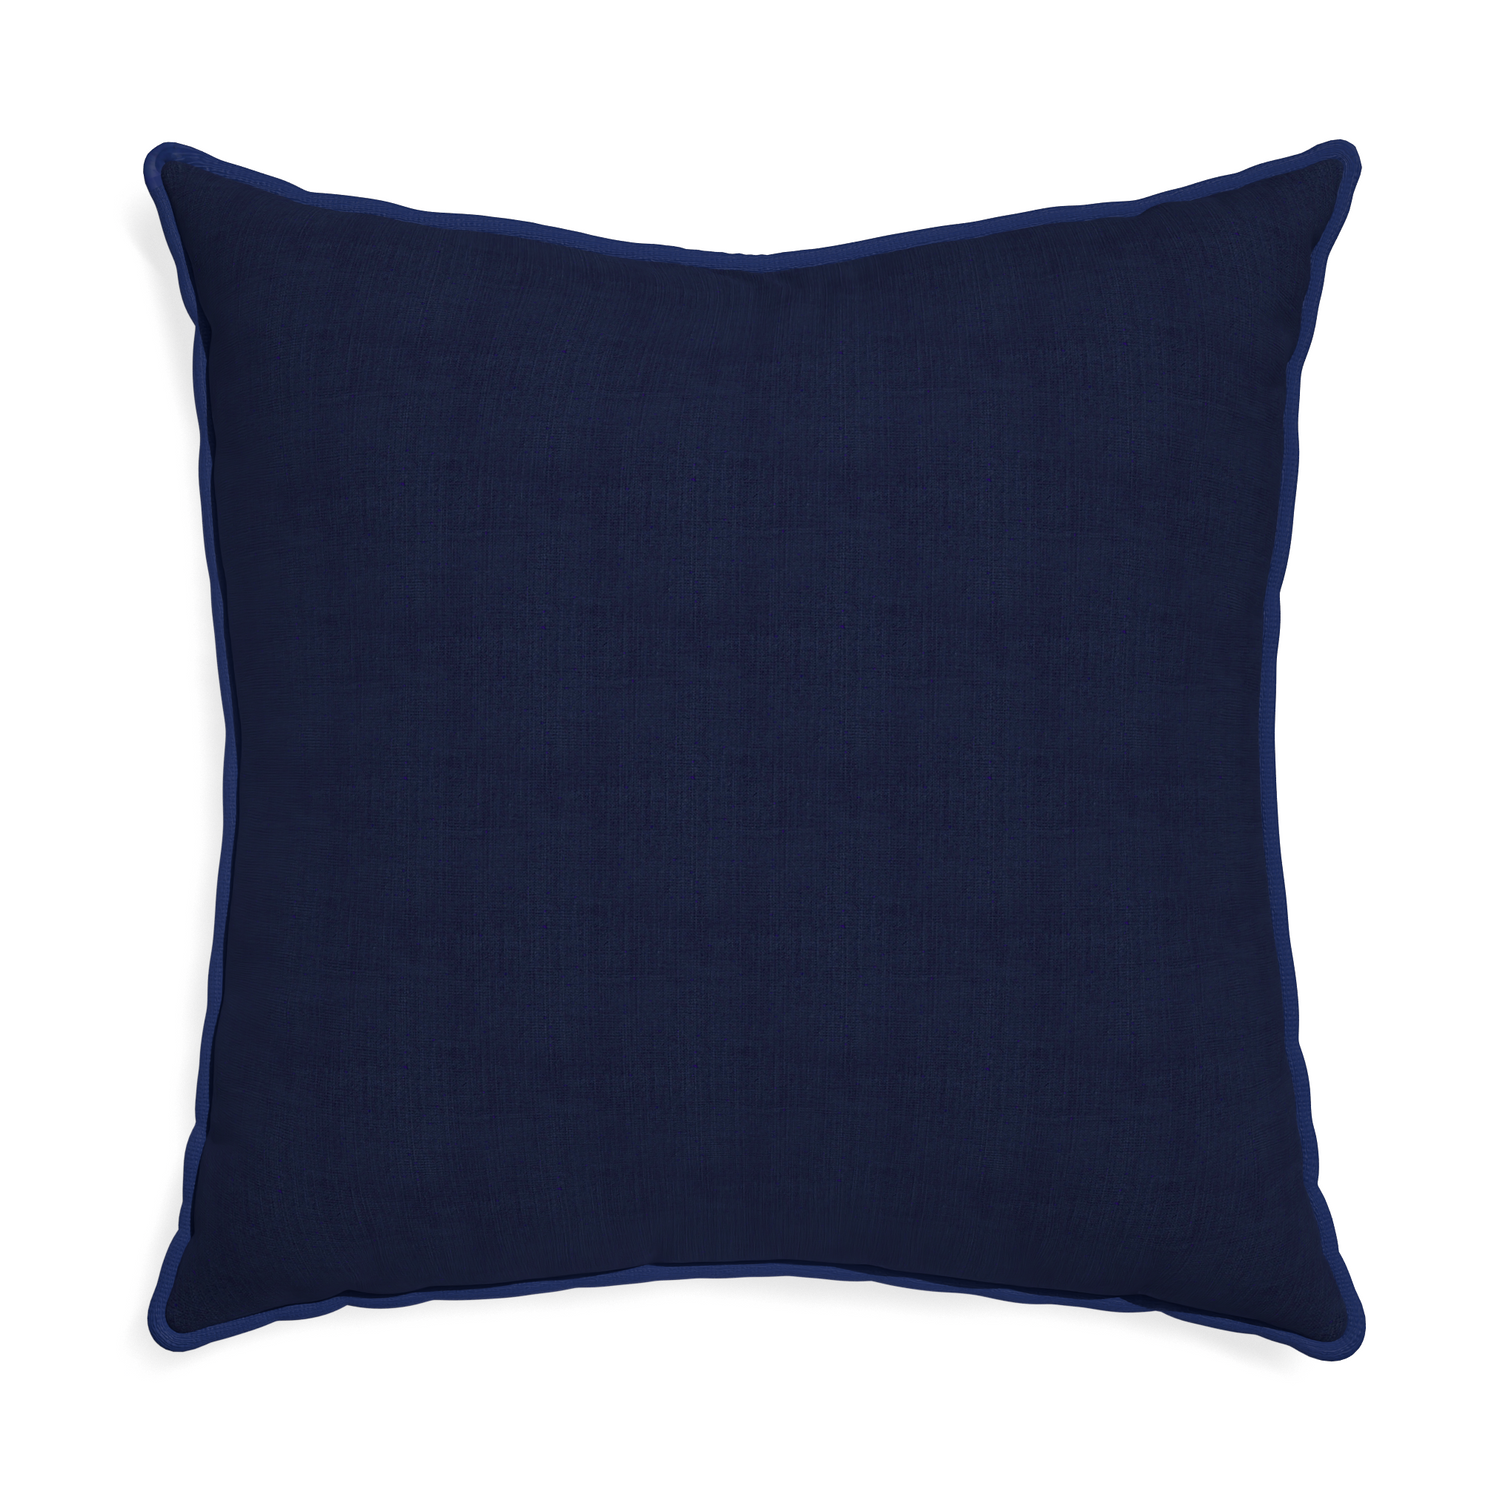 Euro-sham midnight custom navy bluepillow with midnight piping on white background